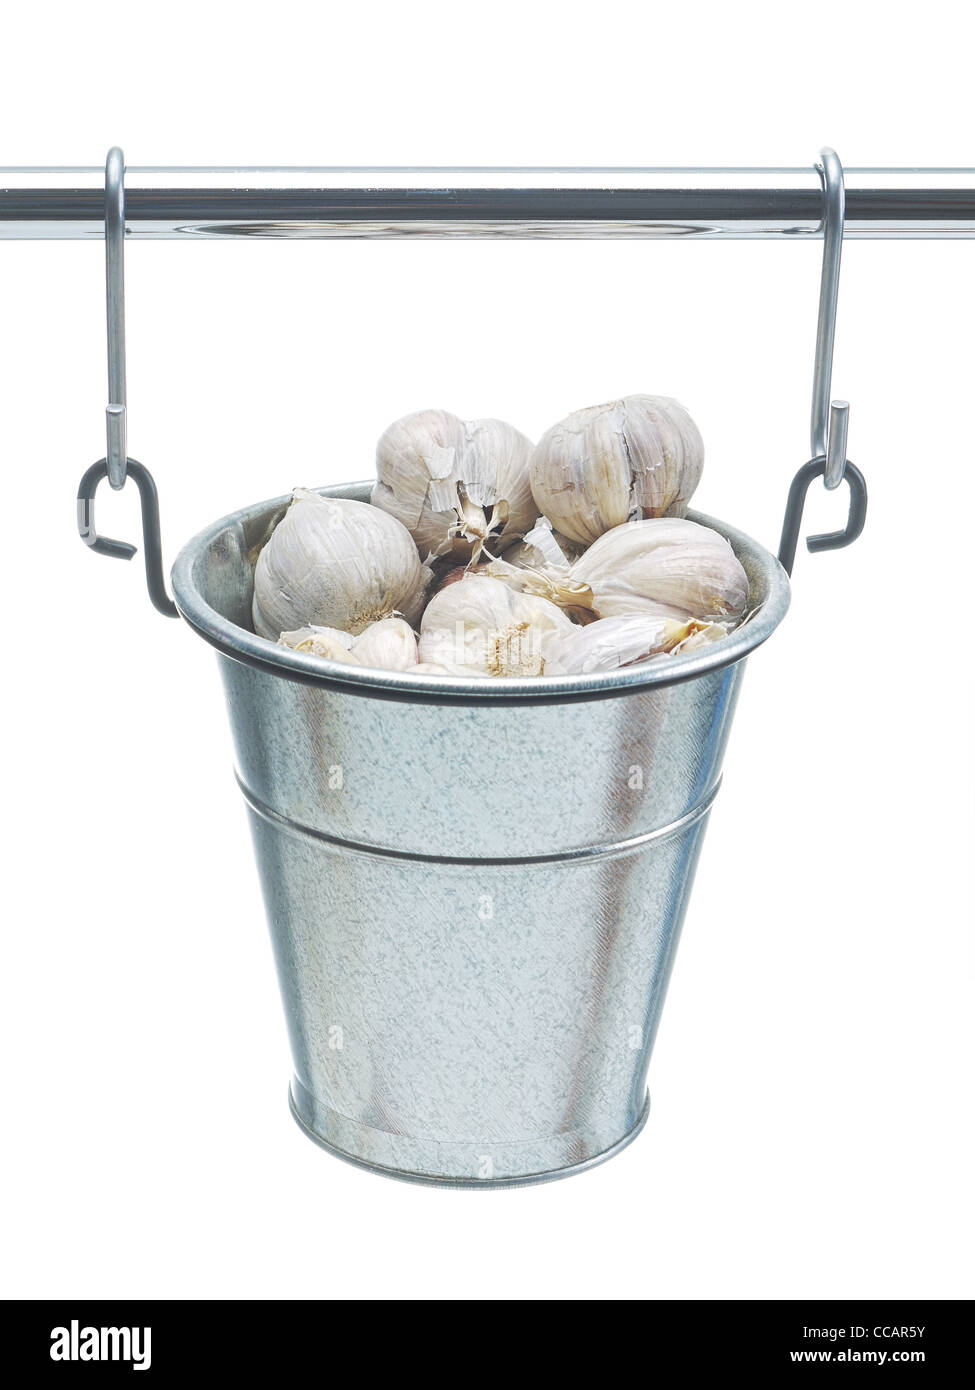 Cloves of garlic in small metal bucket hanging on railing over white background Stock Photo